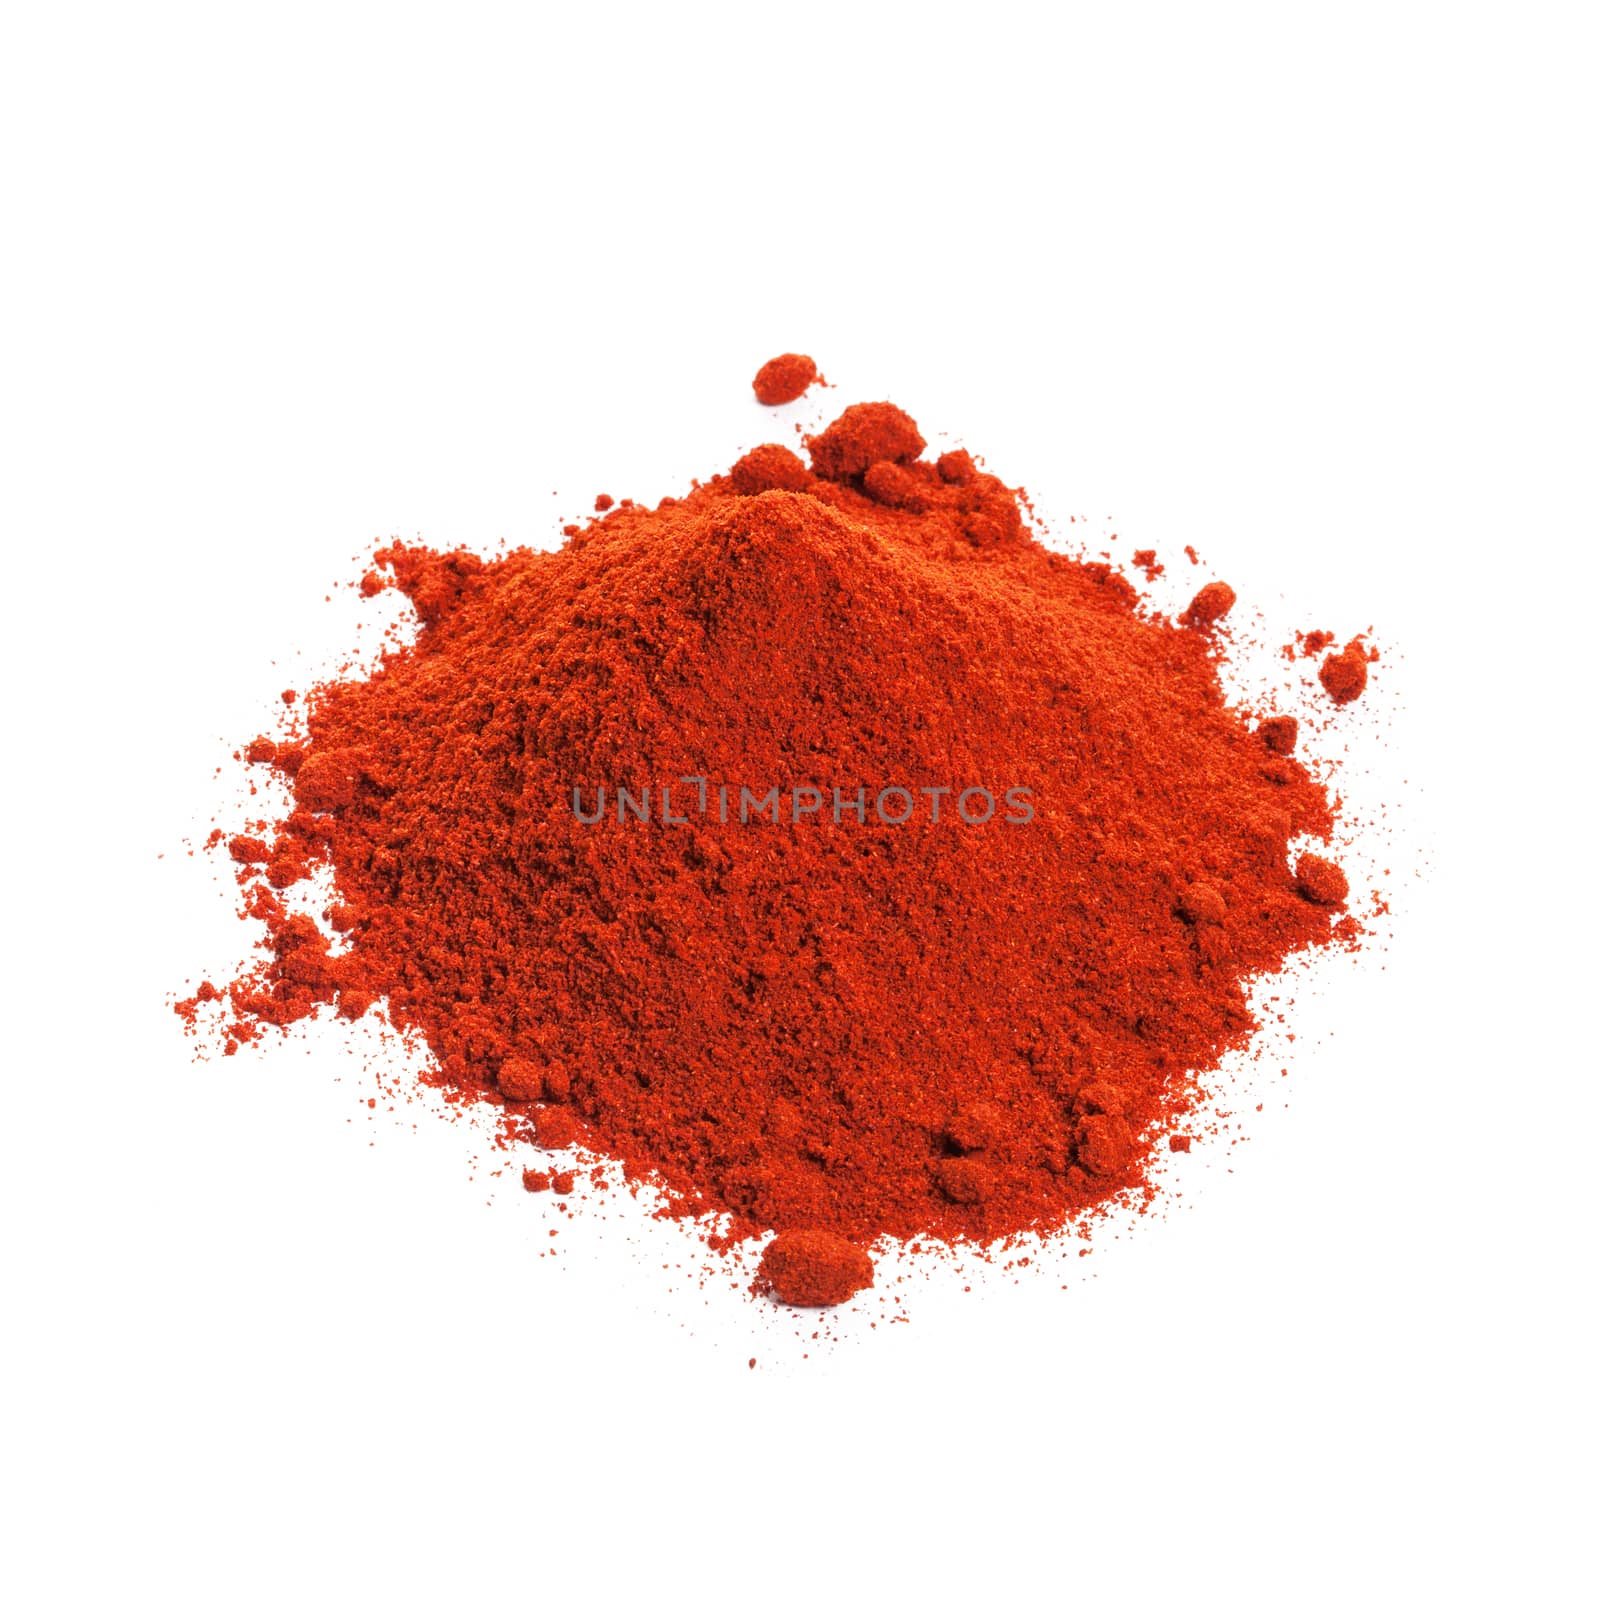 Powdered dried red pepper isolated on white background by ivo_13